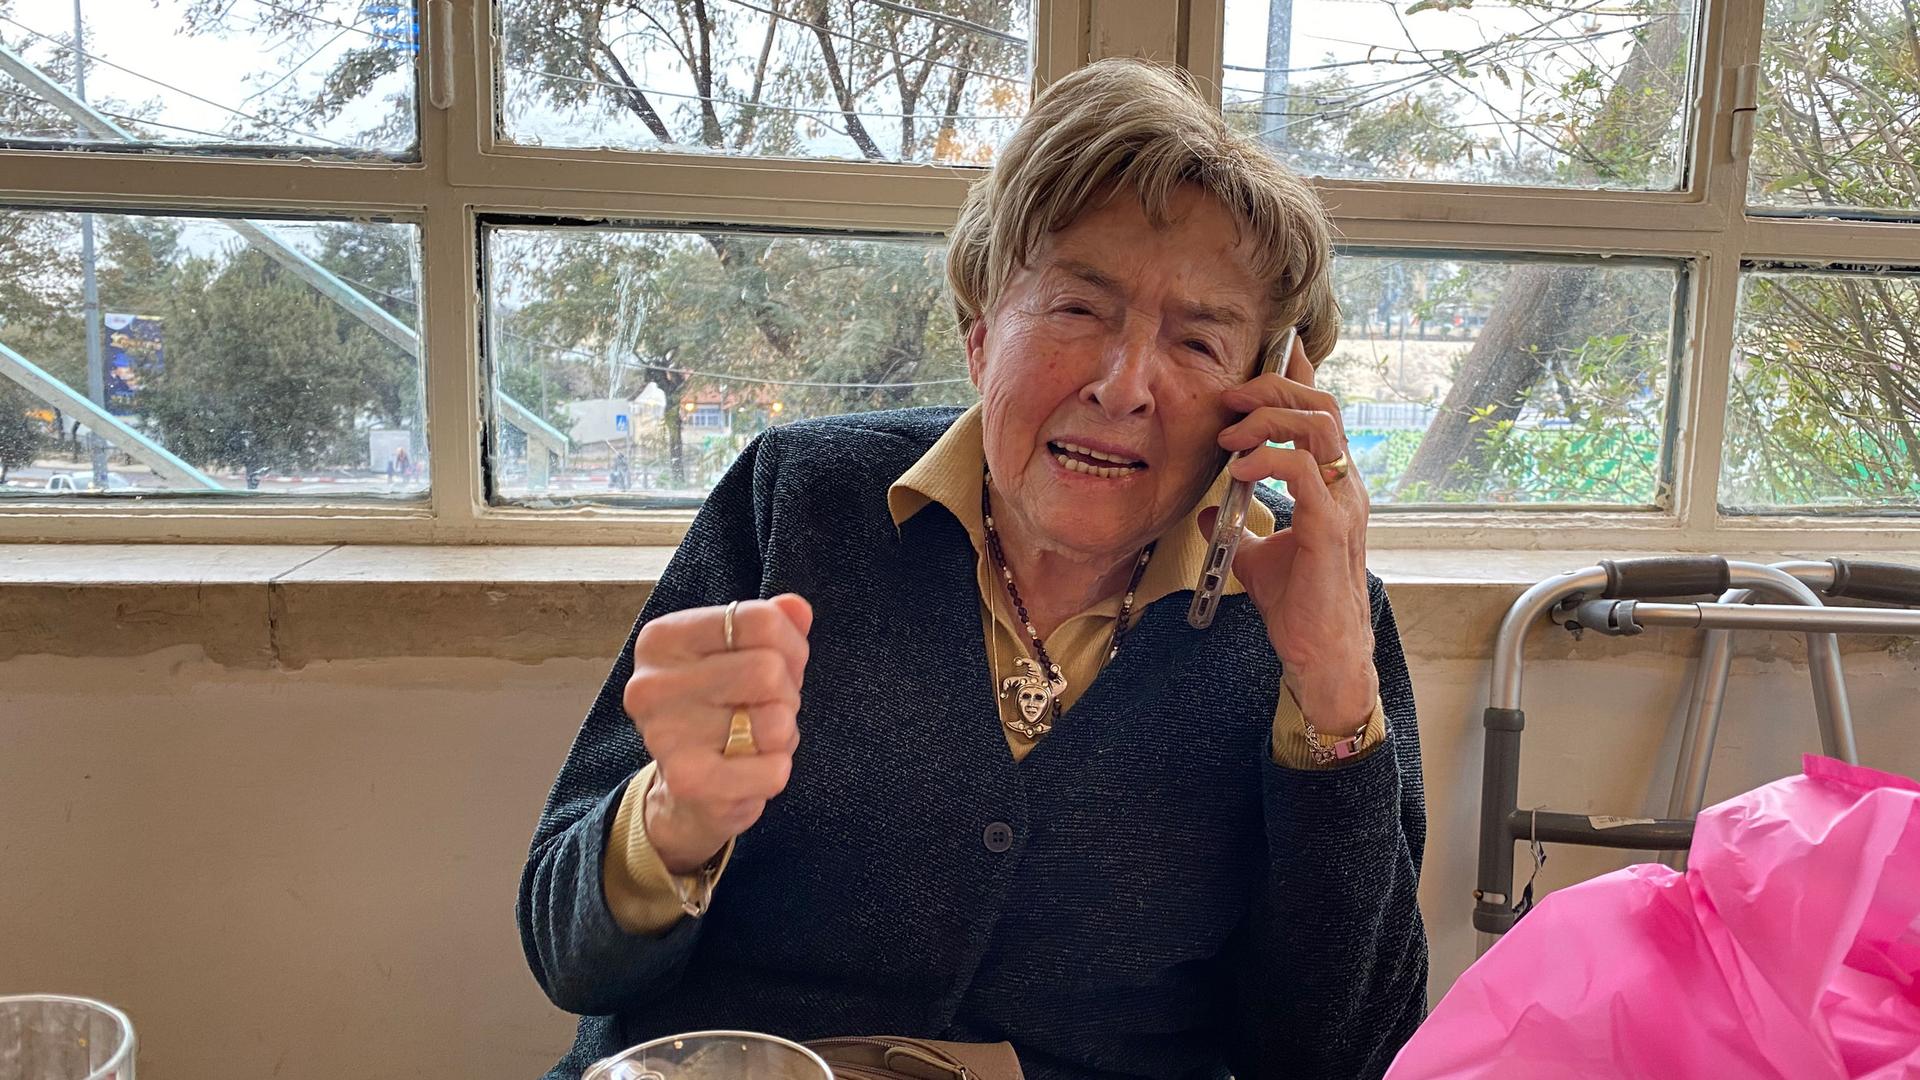 An older woman speaks on the phone